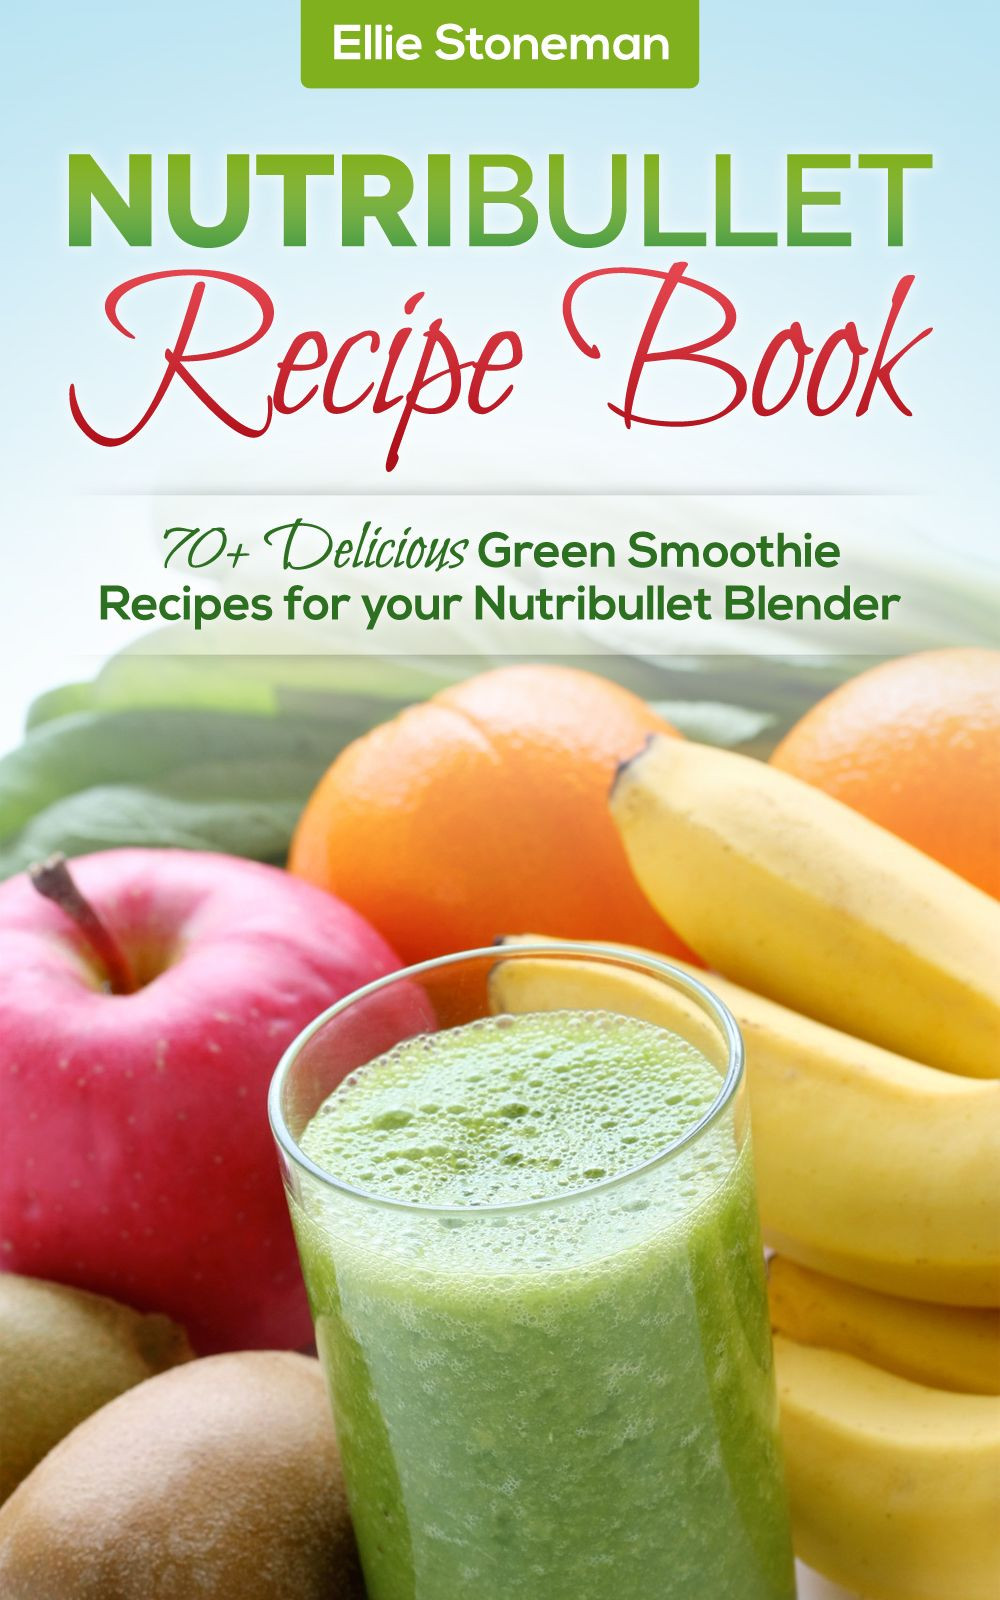 Nutribullet Smoothie Recipes For Weight Loss
 Nutribullet and Magic Bullet Recipes for Weight Loss